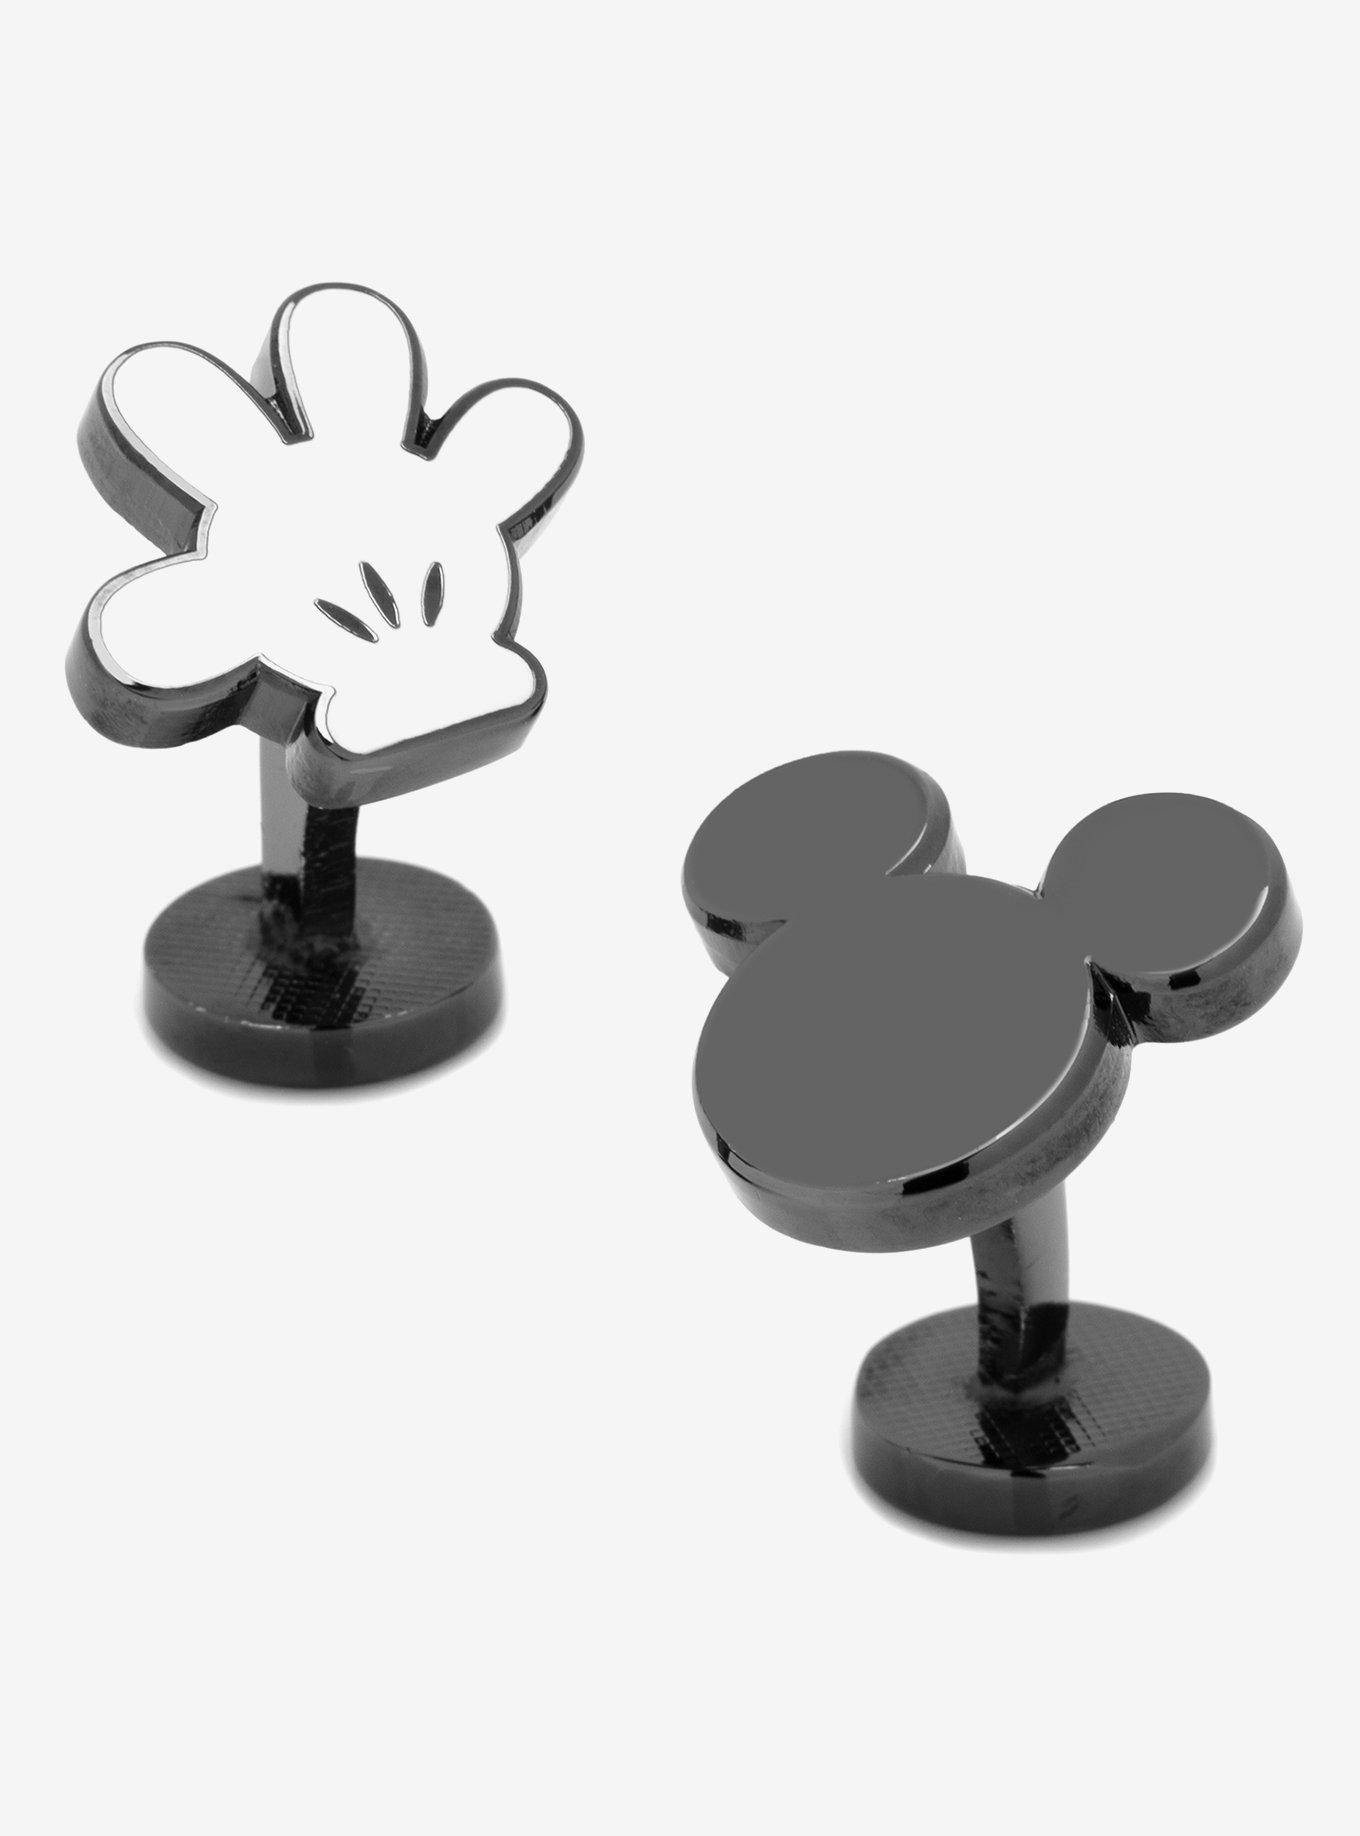 Disney Mickey Mouse Helping Hand Cufflinks, , hi-res